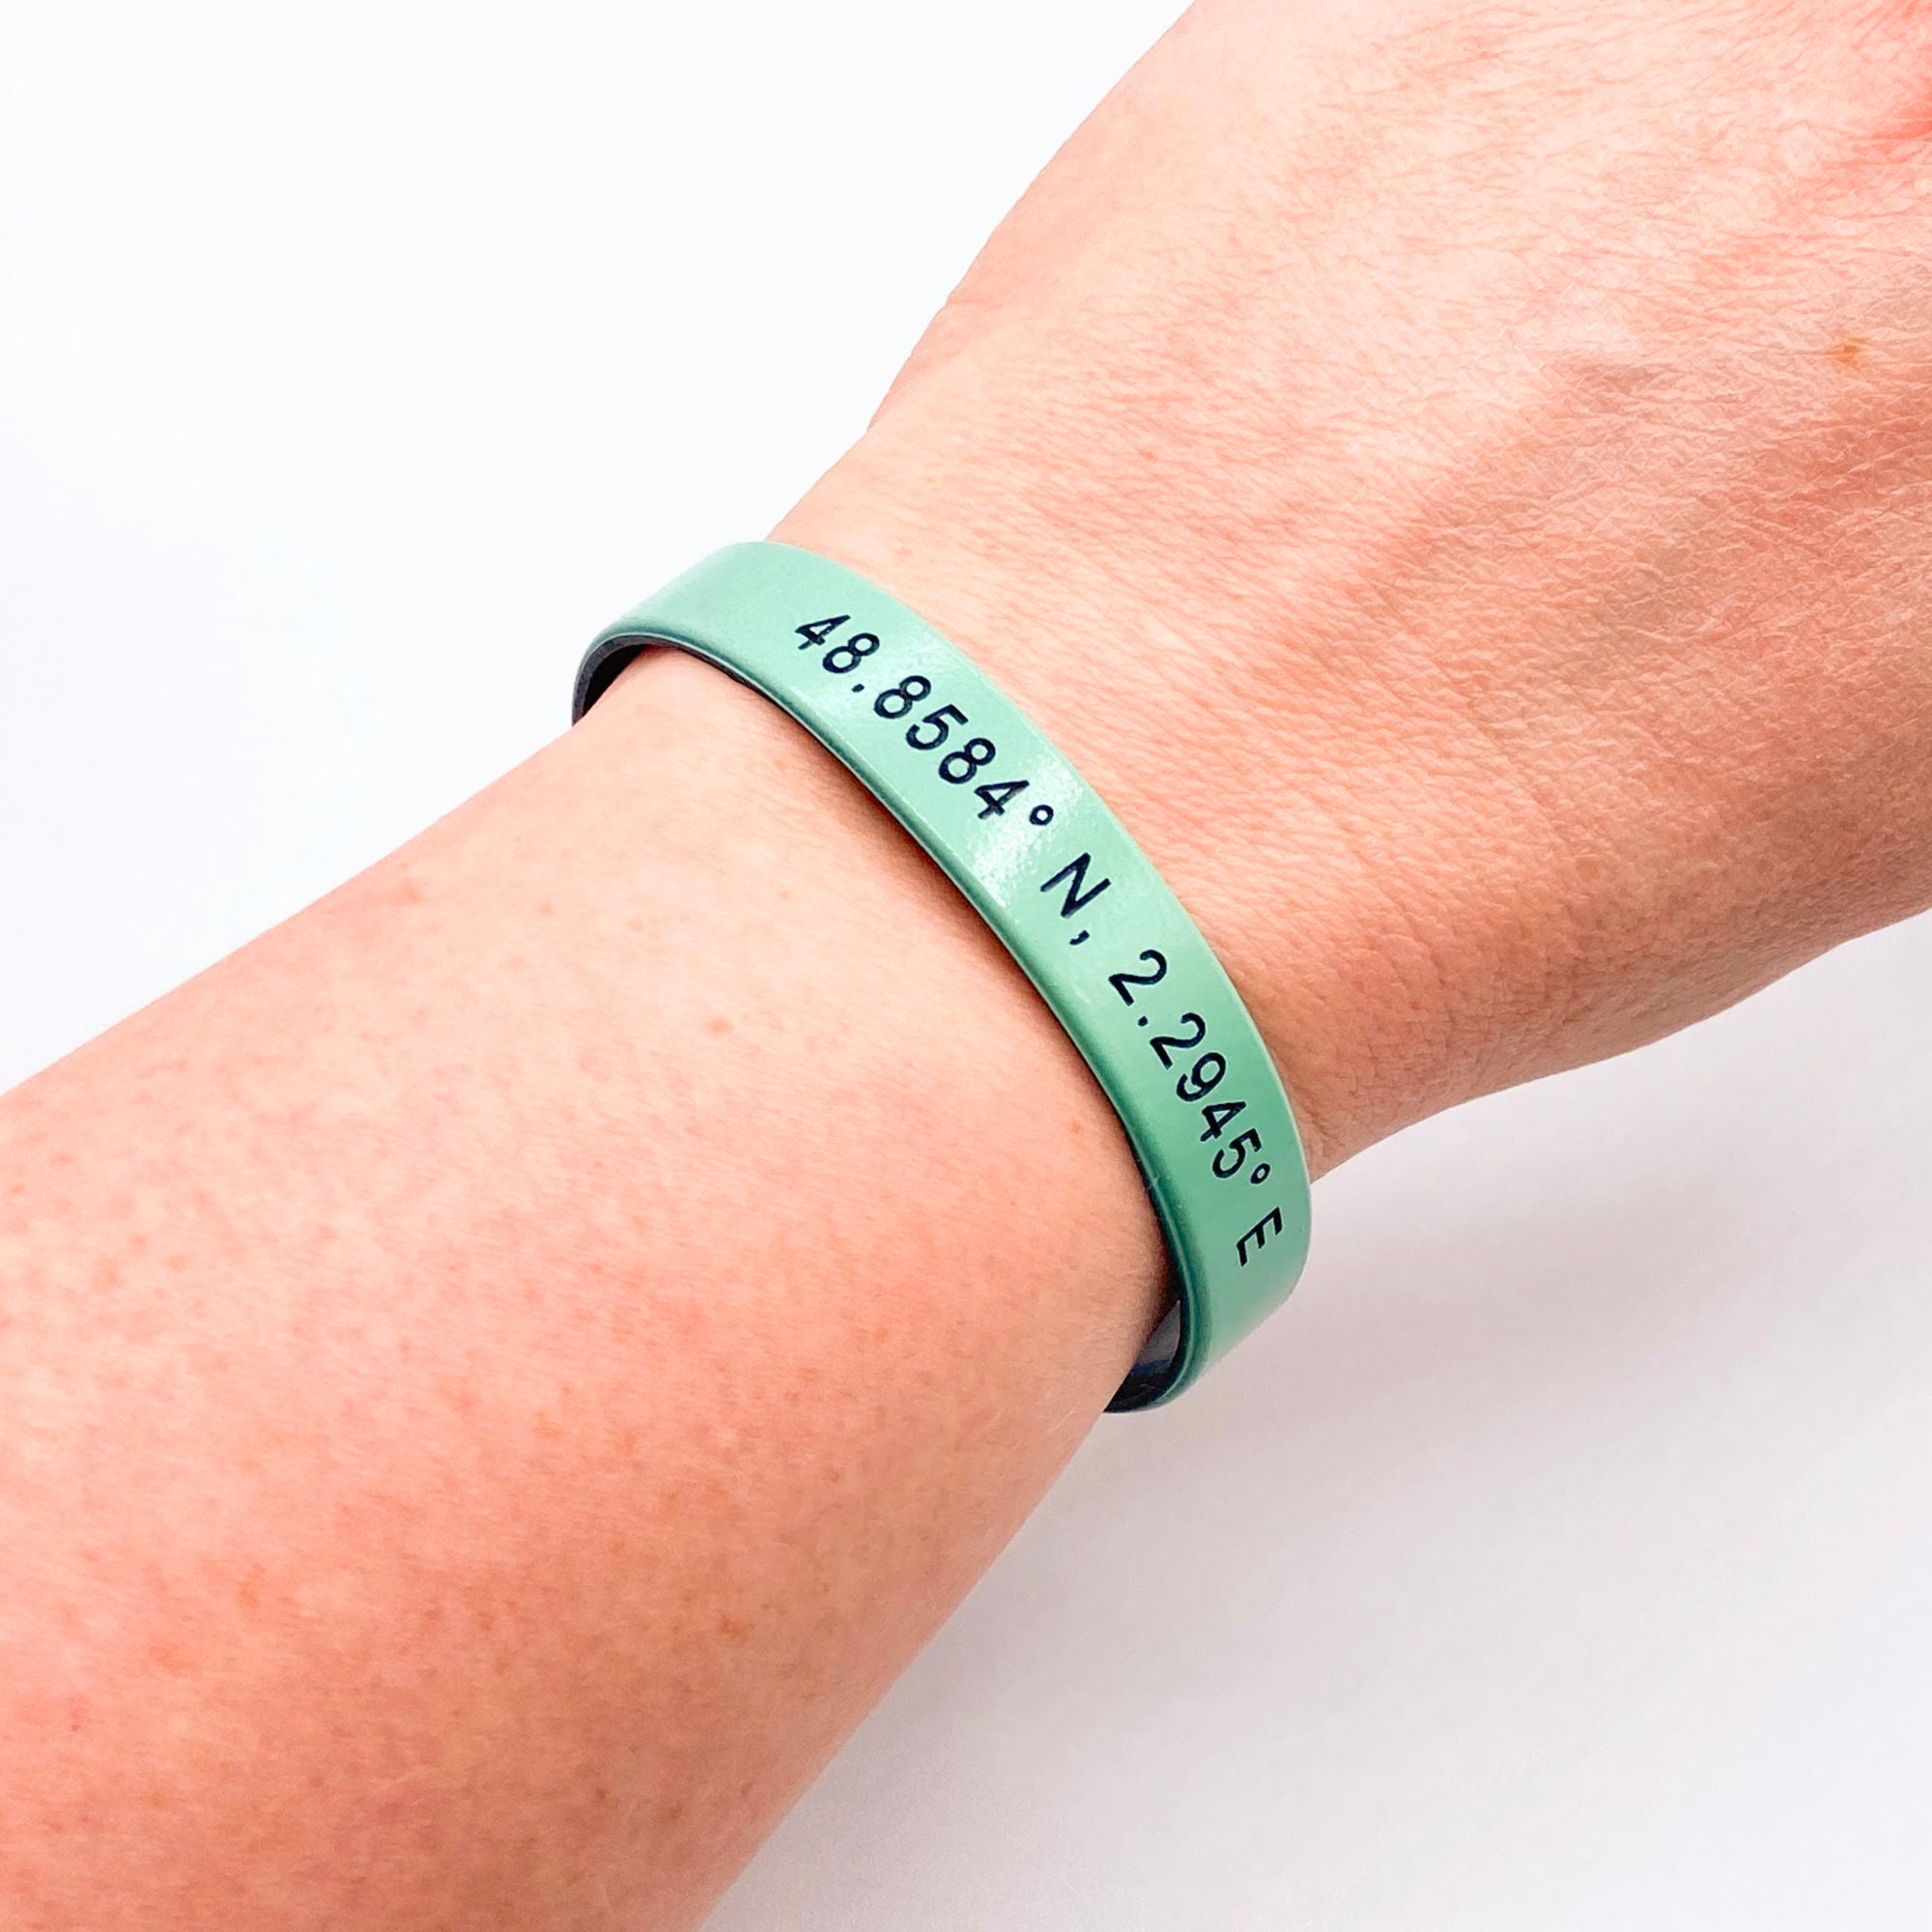 grid coordinates personalised wristband light teal black gift